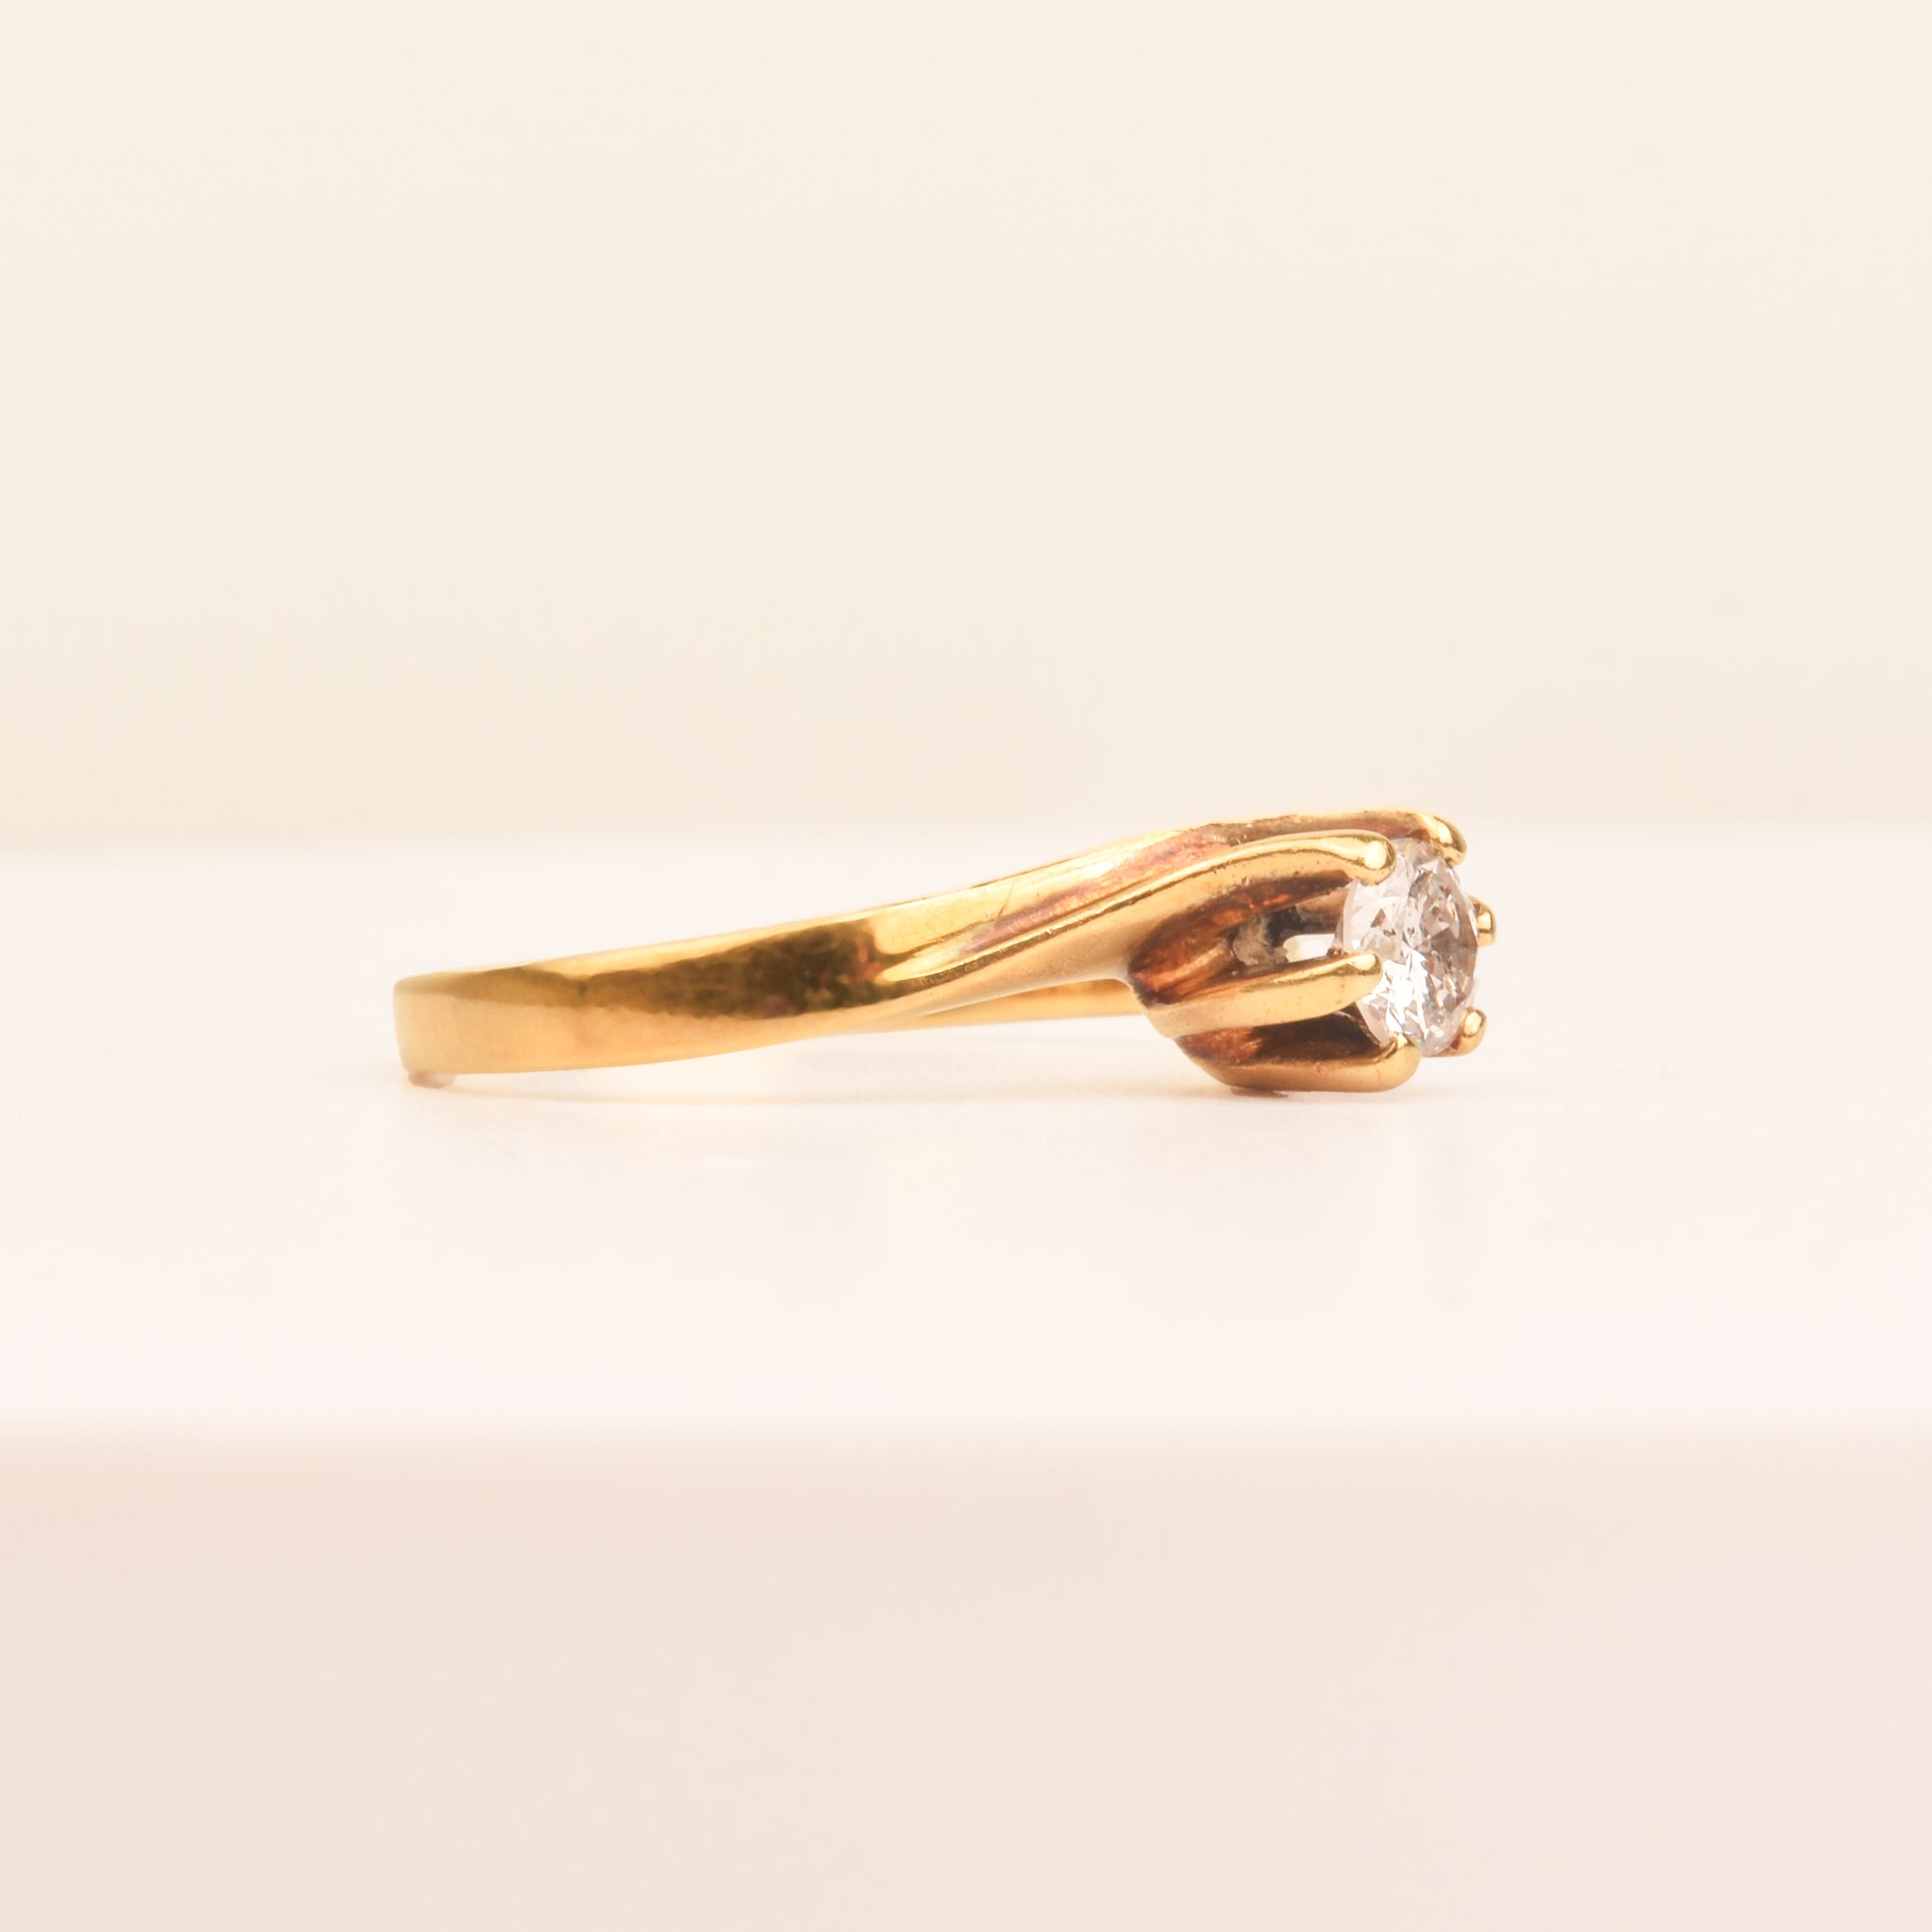 18K yellow gold diamond solitaire engagement ring with 6-prong spiral setting, size 7.5 US, displayed against a neutral background.